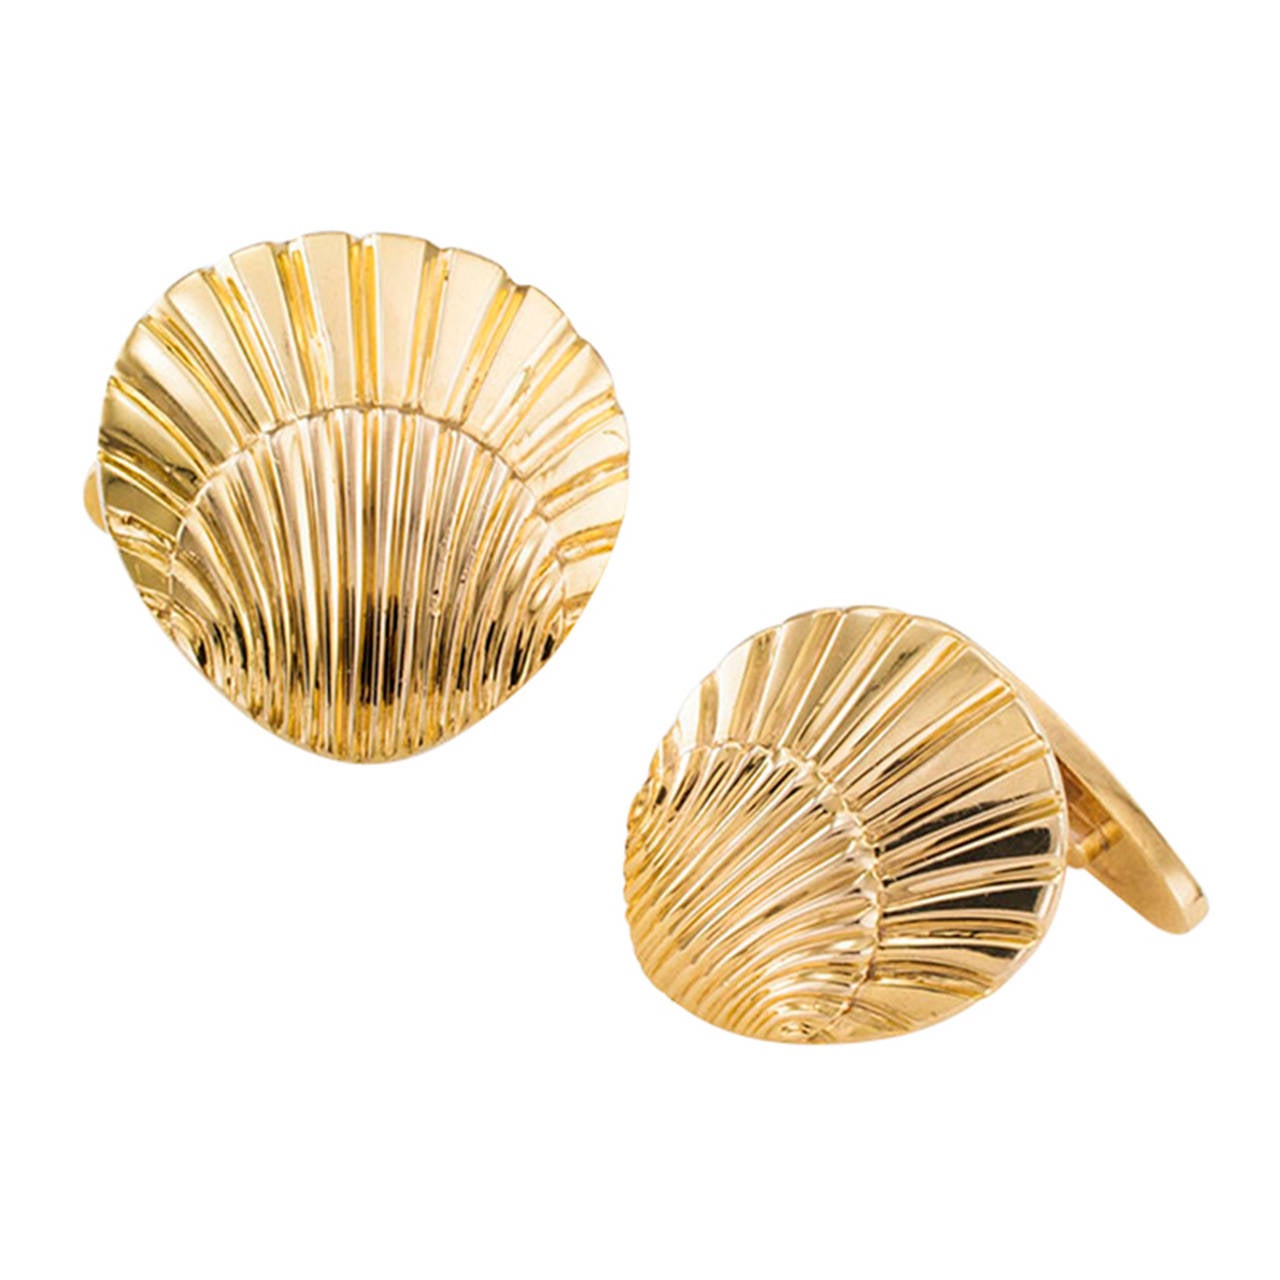 Masculine and classic shell-shaped cuff links defining a well tailored look with that special glint that only polished gold is capable of giving.  Also, the curved connector bar makes them very comfortable to wear. Made in 14 karat gold.  Heirloom